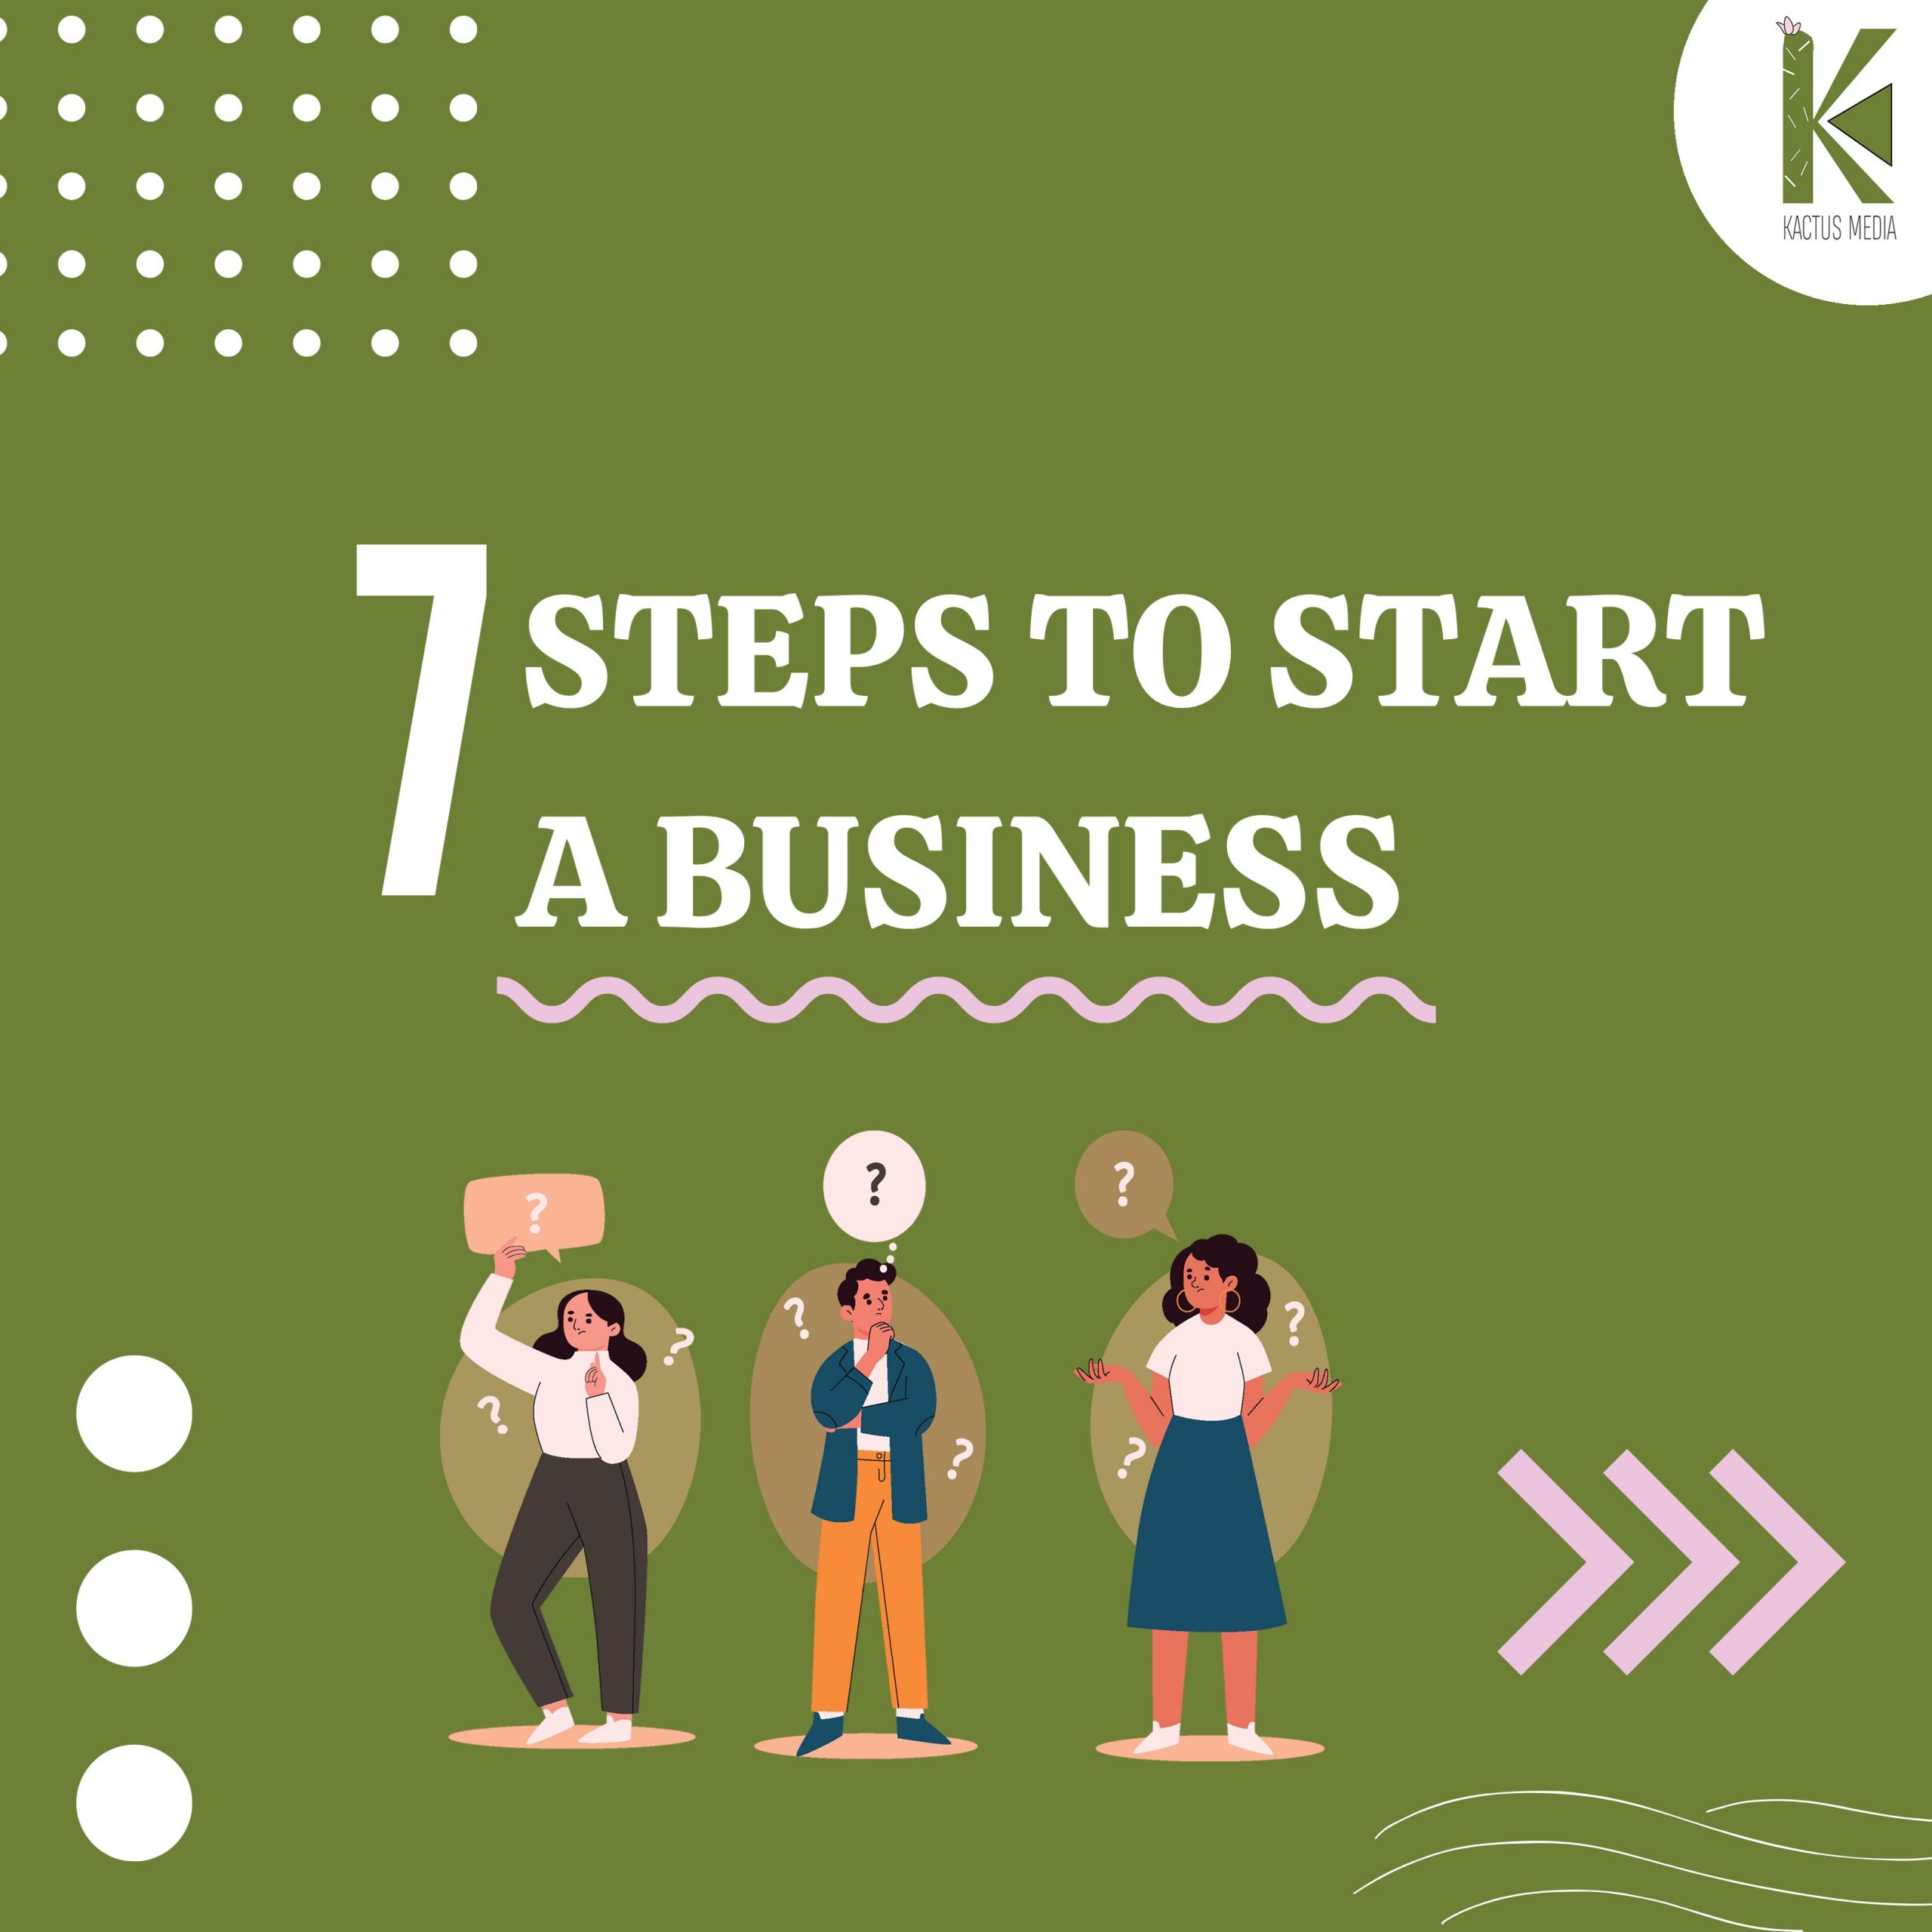 7 steps to start a business